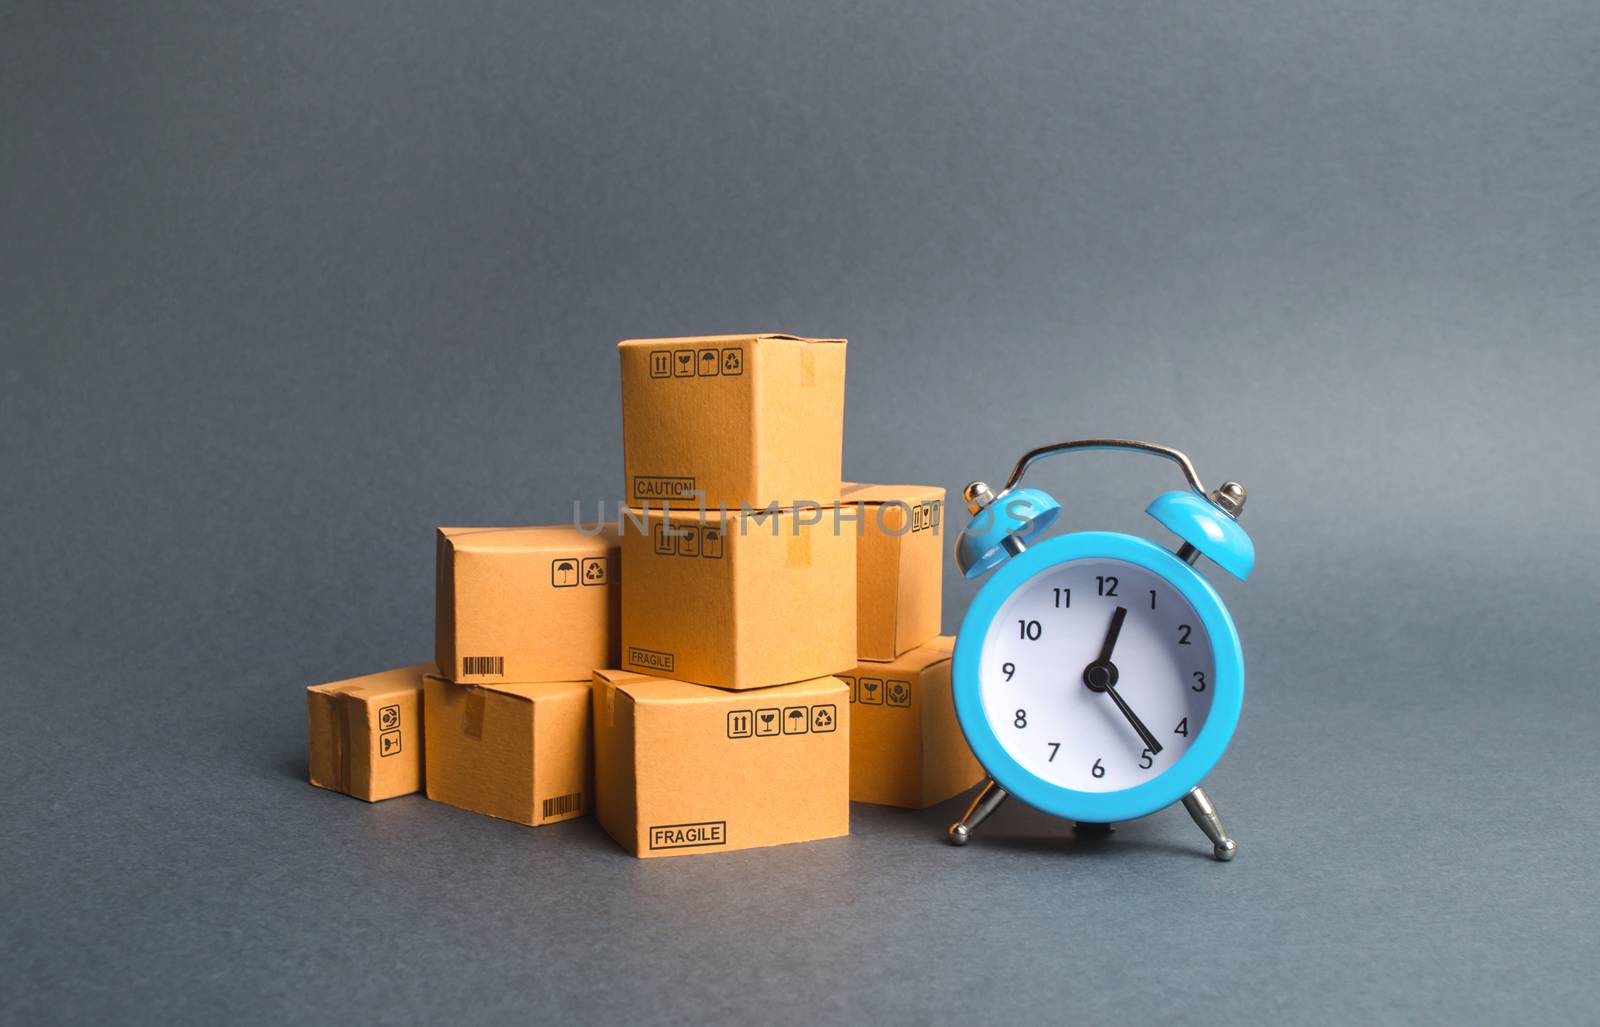 A stack of cardboard boxes and a blue alarm clock. Express delivery concept. Temporary storage, limited offer and discount. Optimization of logistics and delivery, improving efficiency, reducing costs by iLixe48